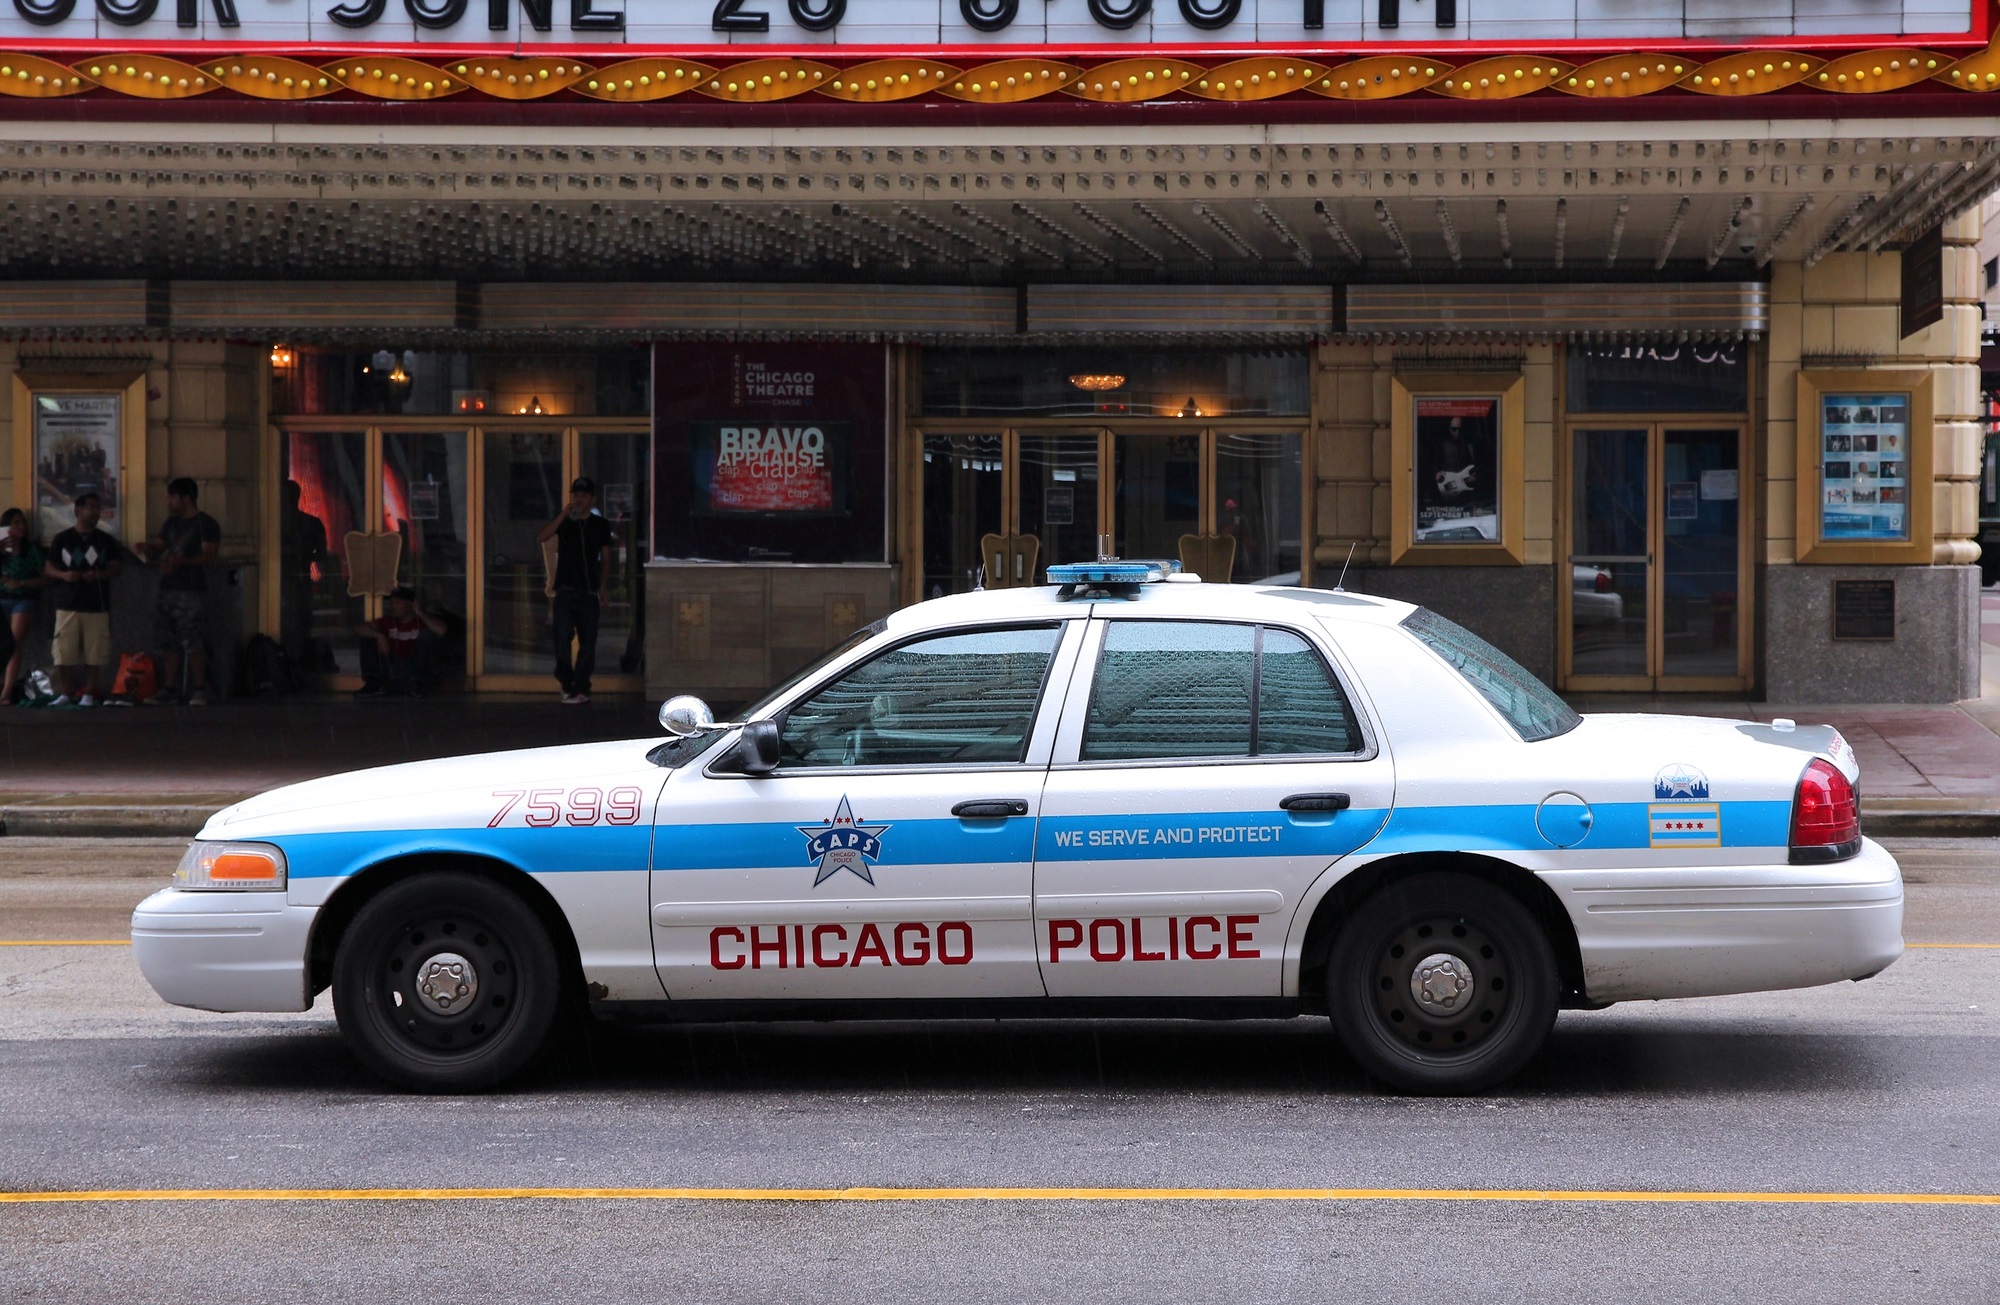 Chicago police autism friendly